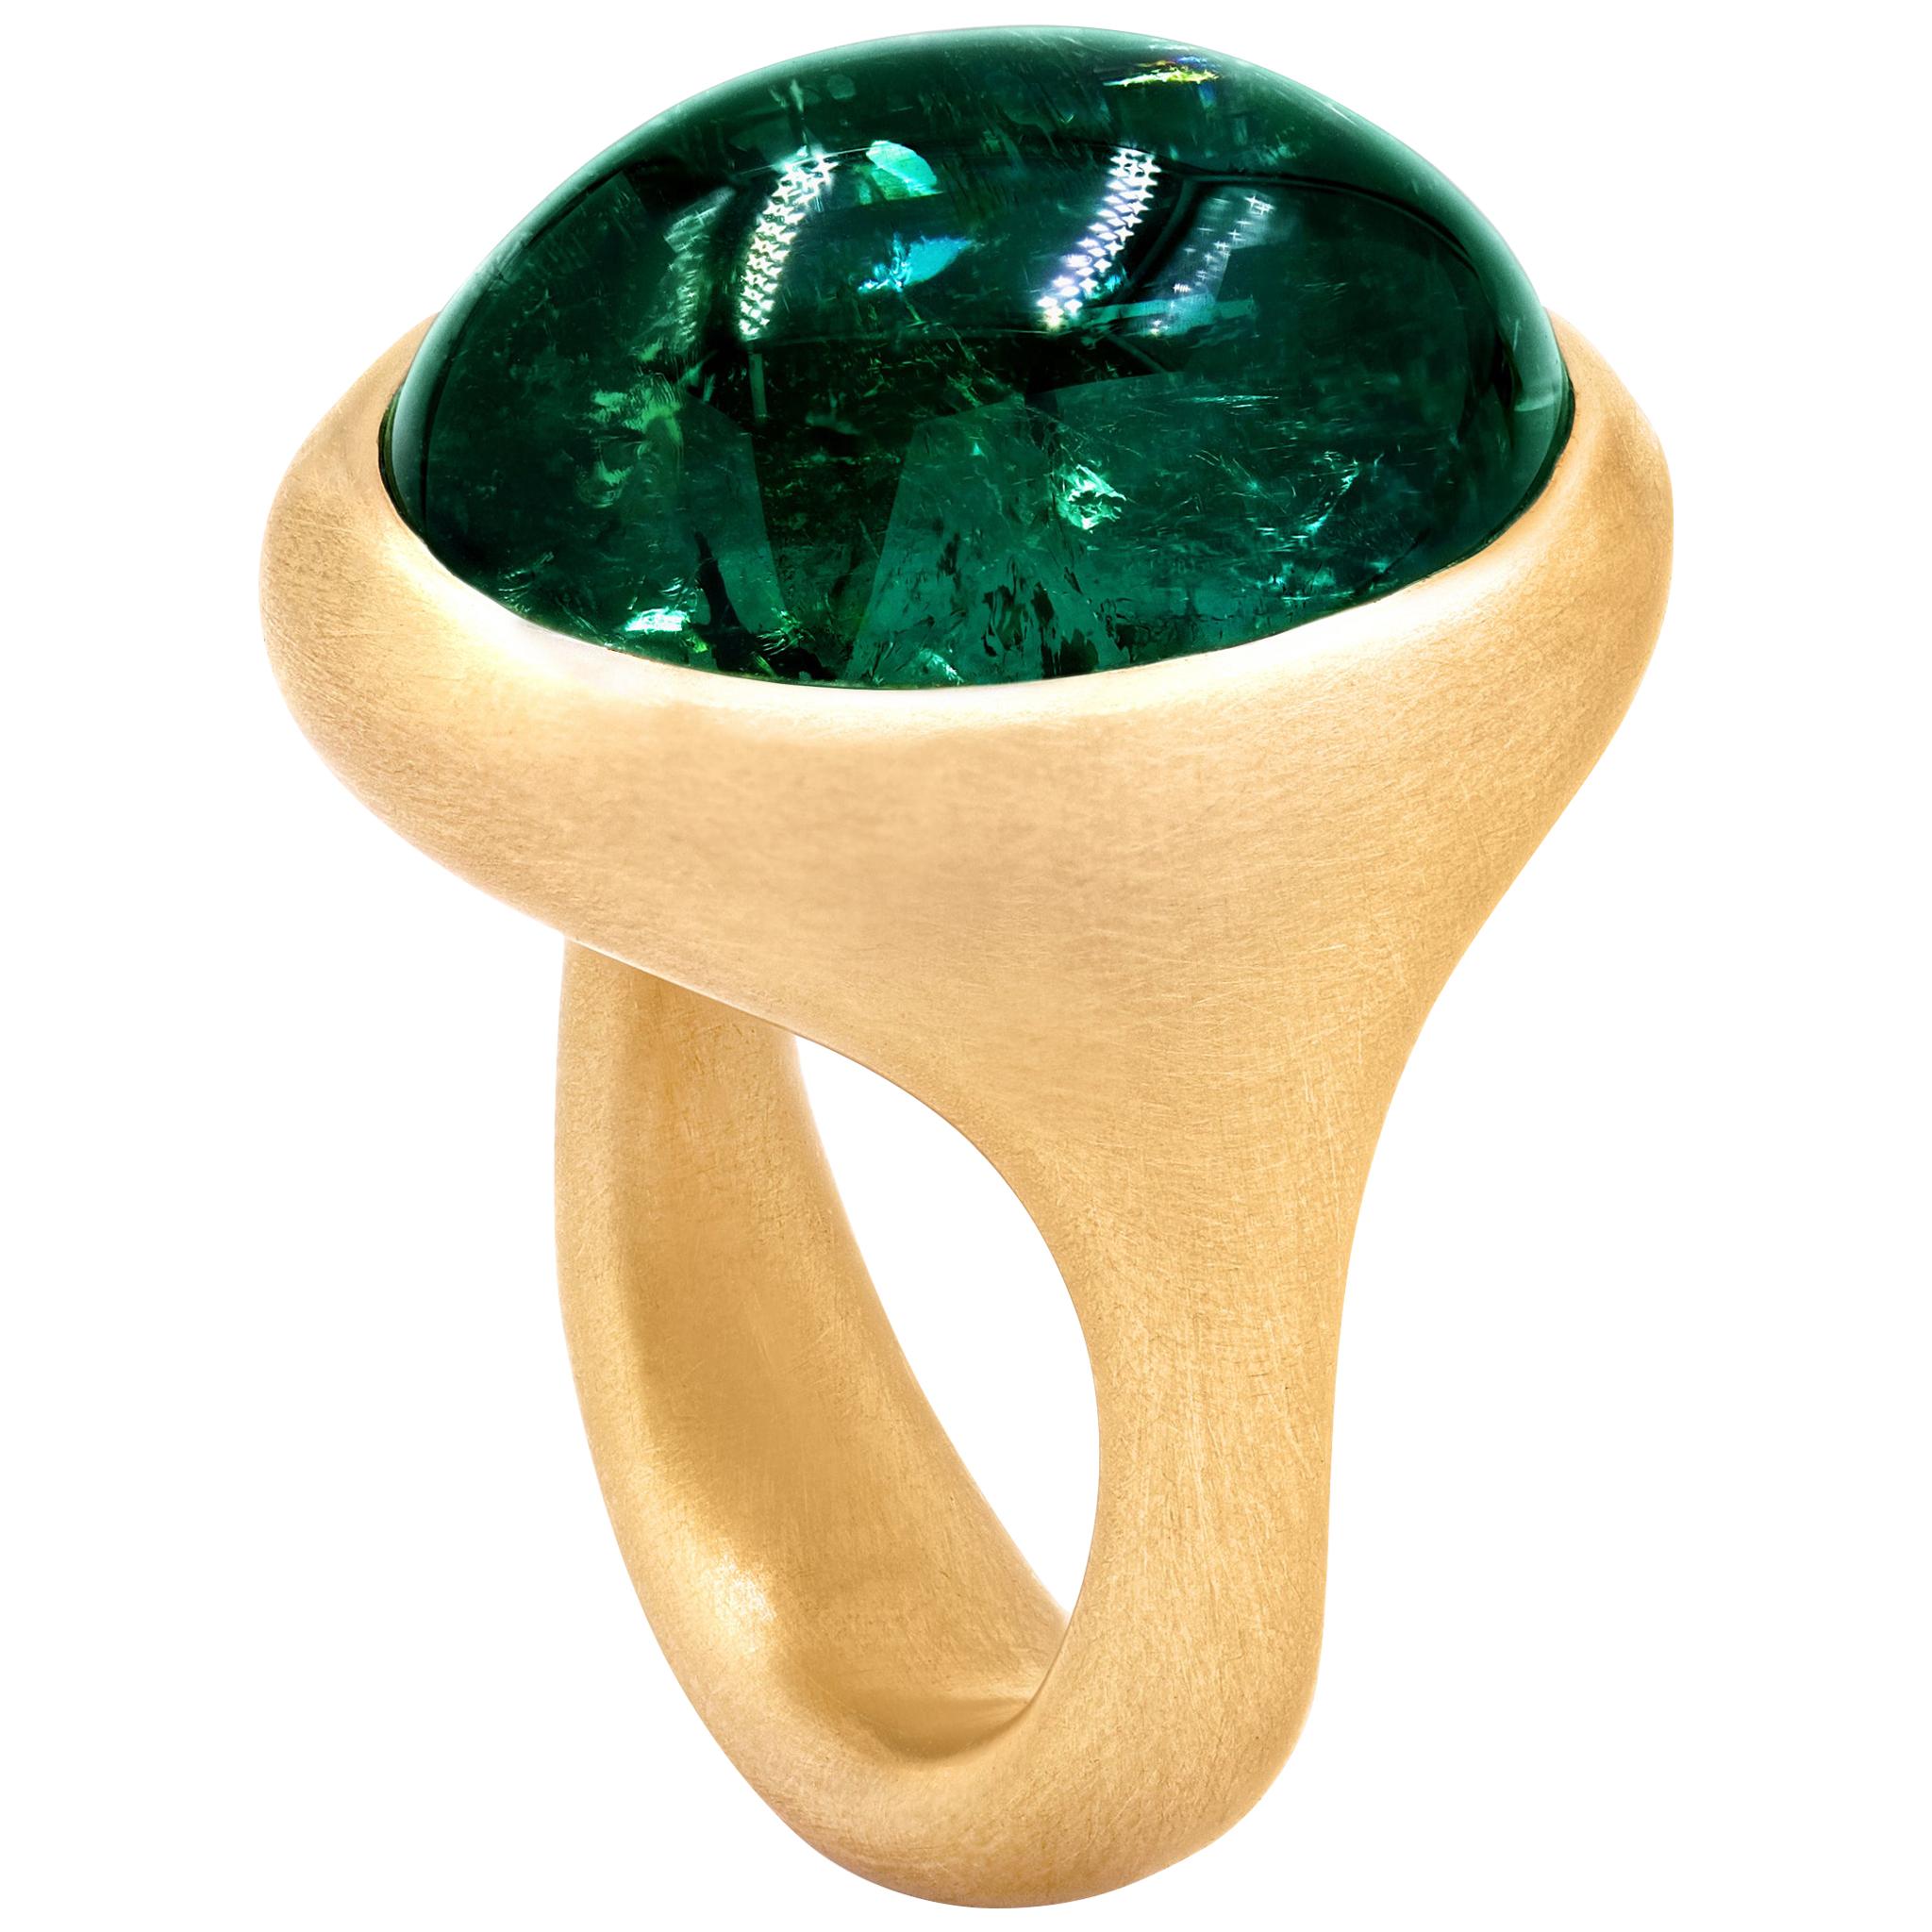 23.69 Carat Lush Bluish Green One of a Kind Cast Yellow Gold Ring, Lola Brooks